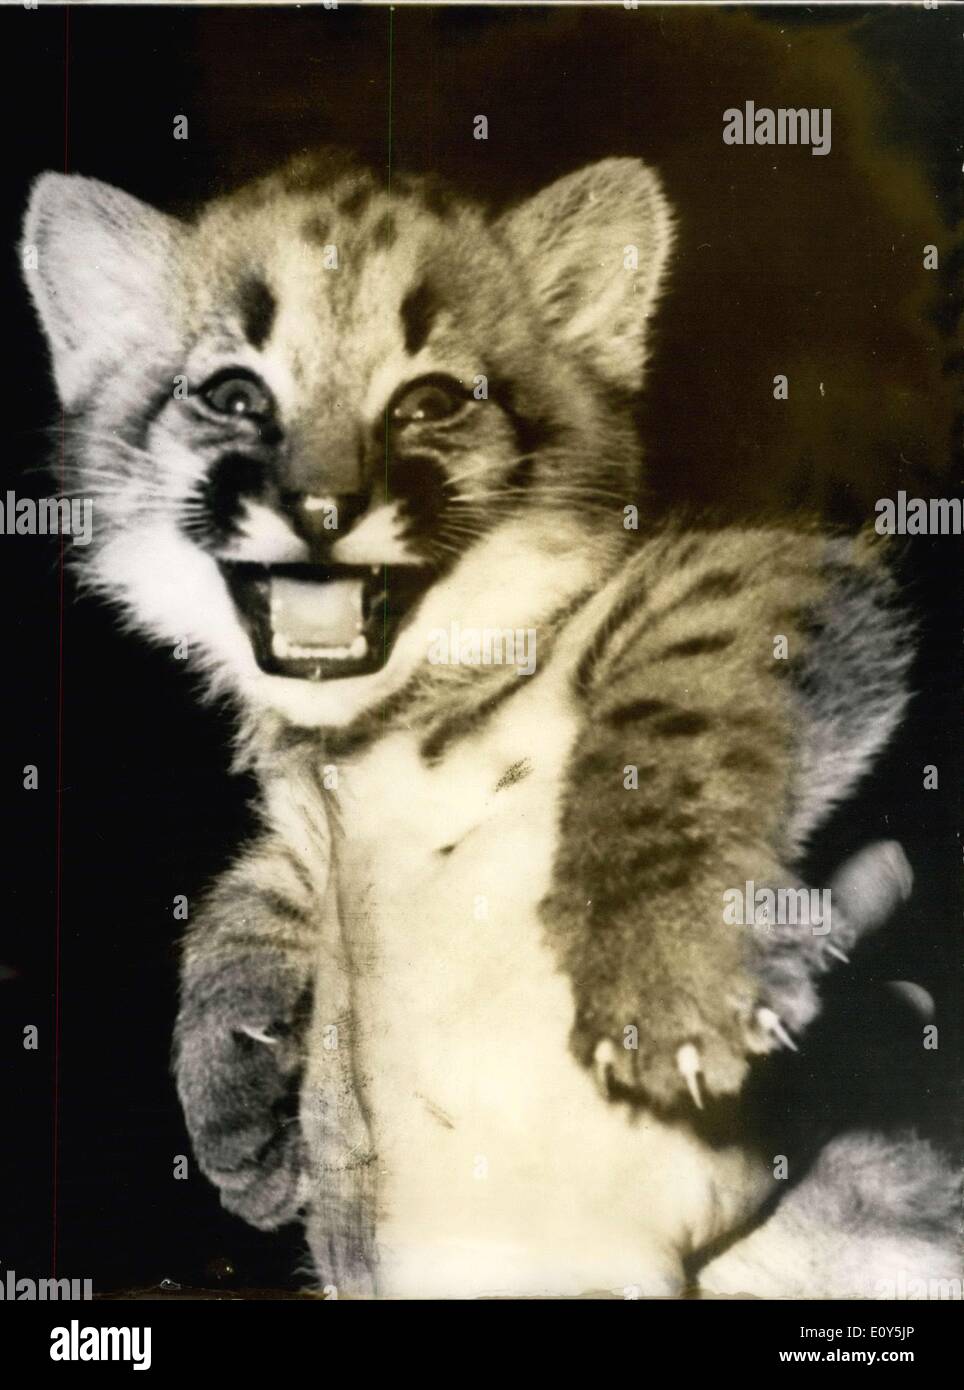 Feb. 21, 1969 - Smile Please!: Photo shows This little Puma, born four  weeks ago at Zurich Zoo, provided photographers with this delightful  expression. Who says animals can't laugh! Stock Photo - Alamy